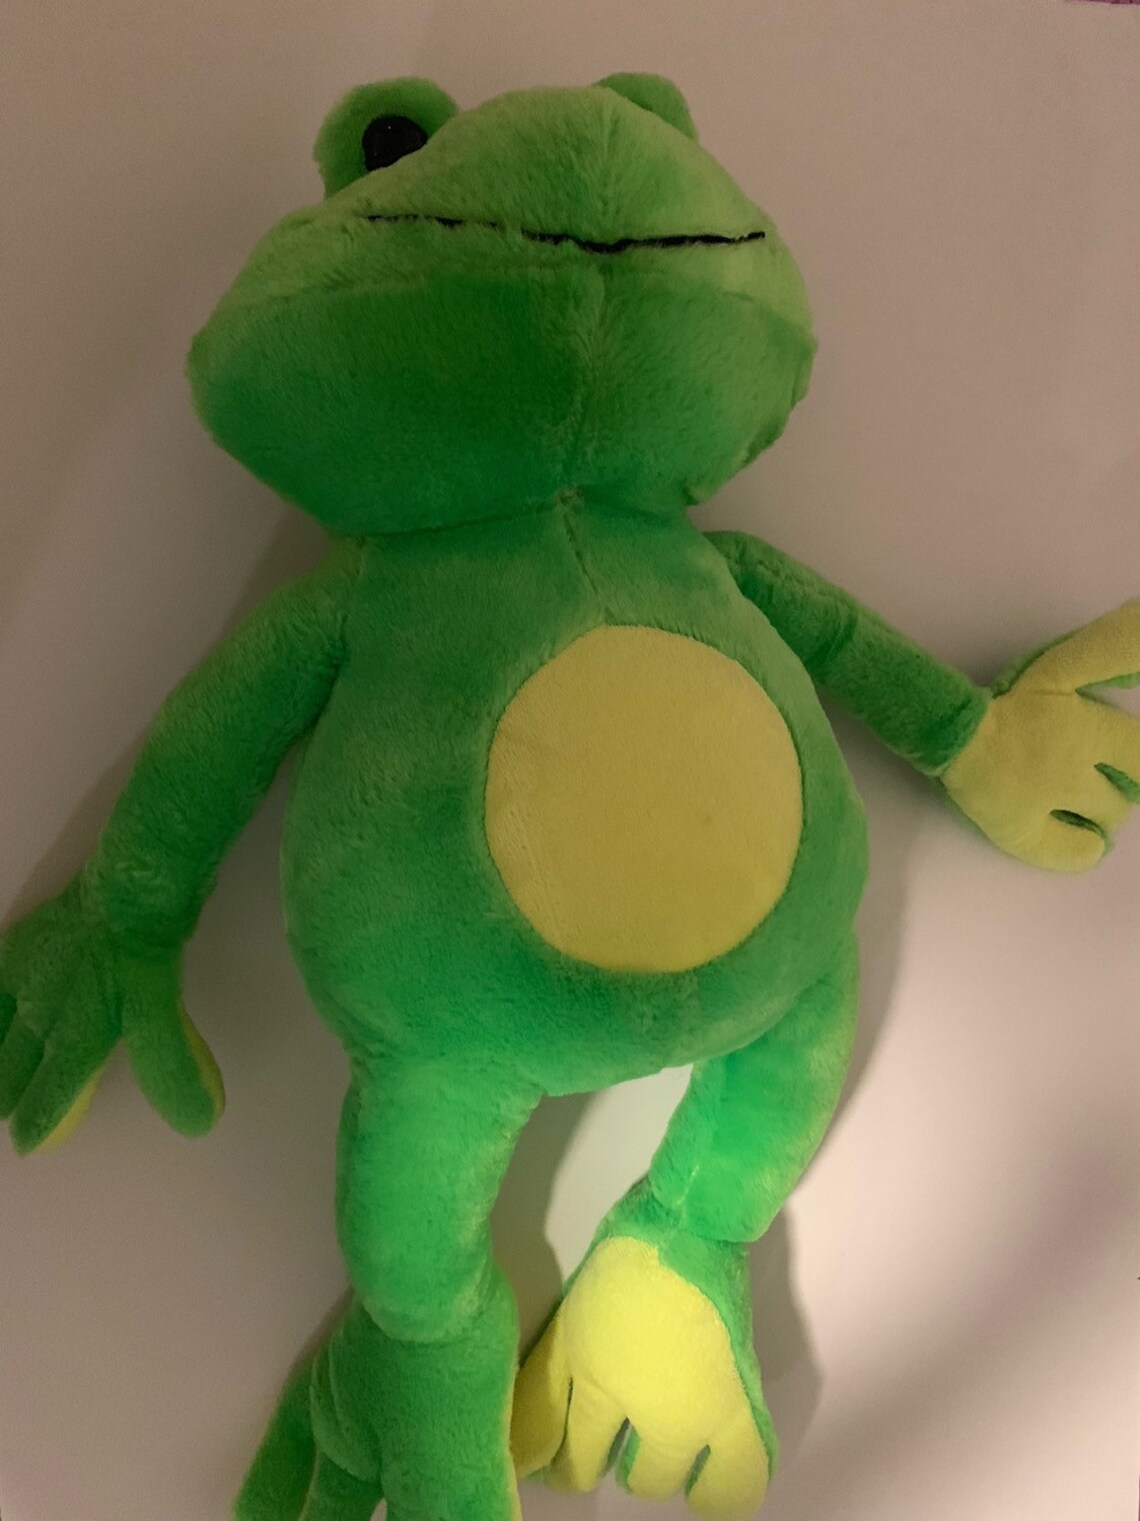 Weighted stuffed animal weighted frog with 5-6 lbs AUTISM | Etsy